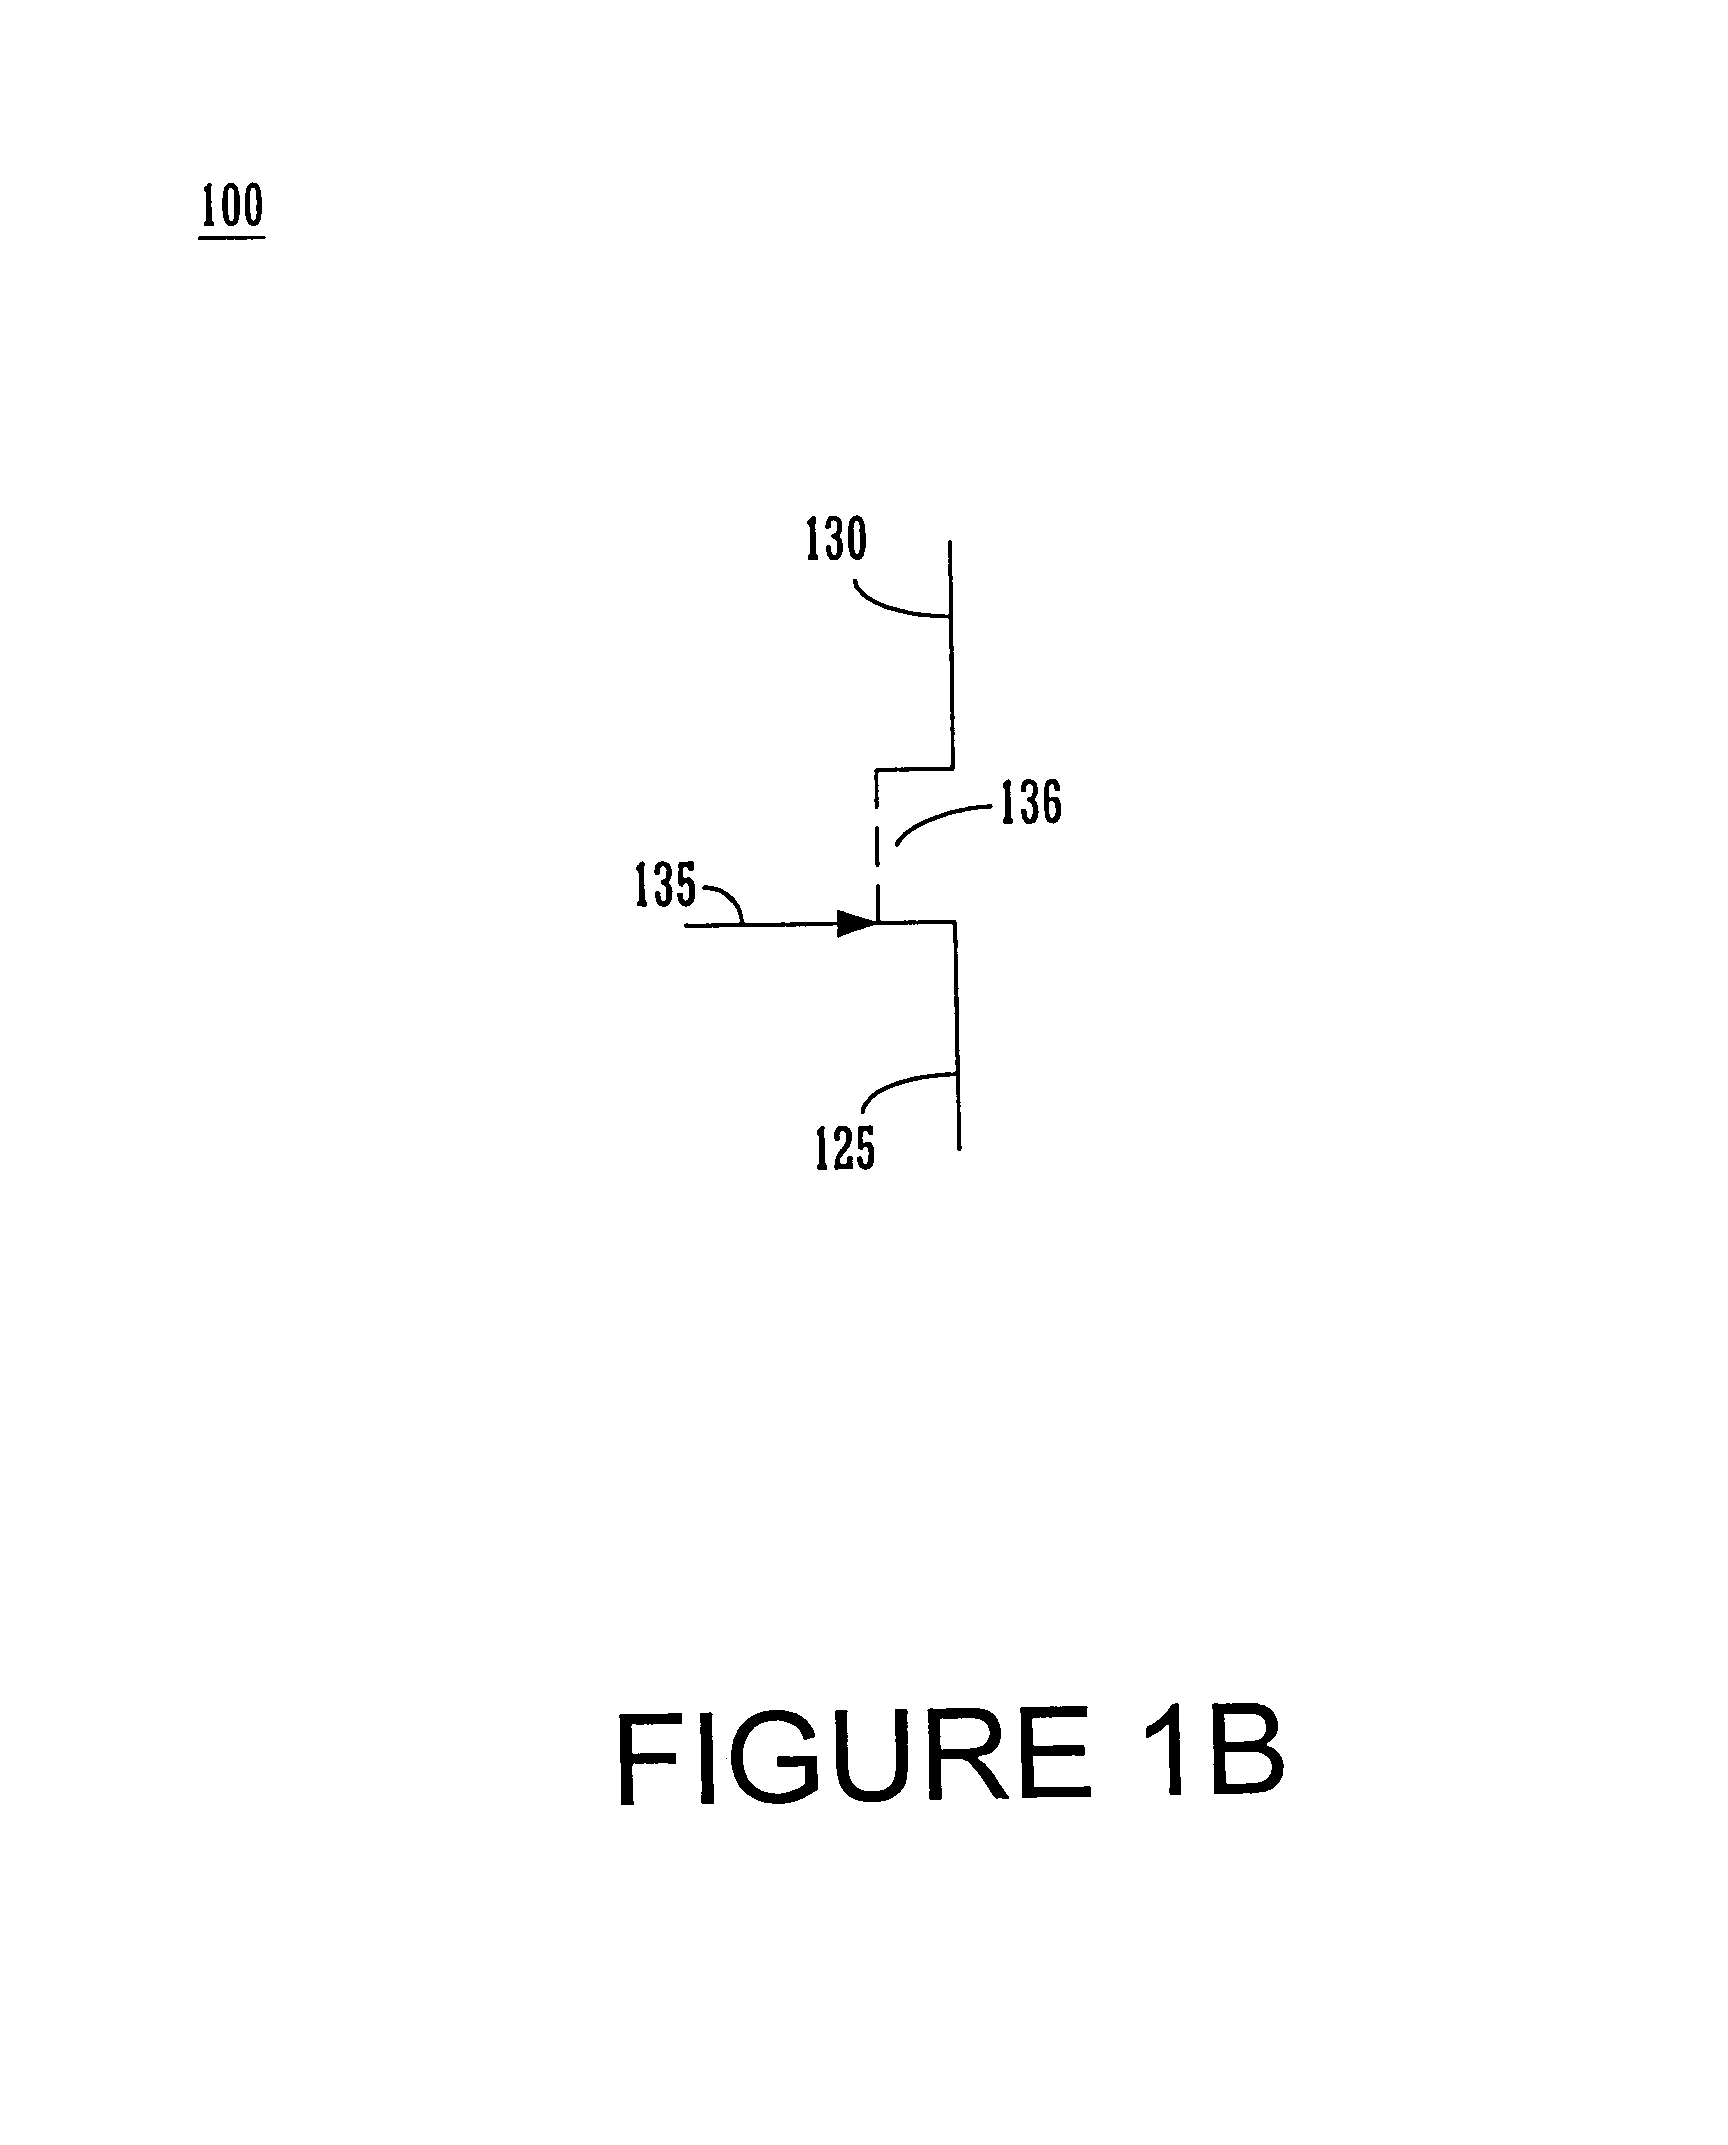 Starter device for normally off JFETs